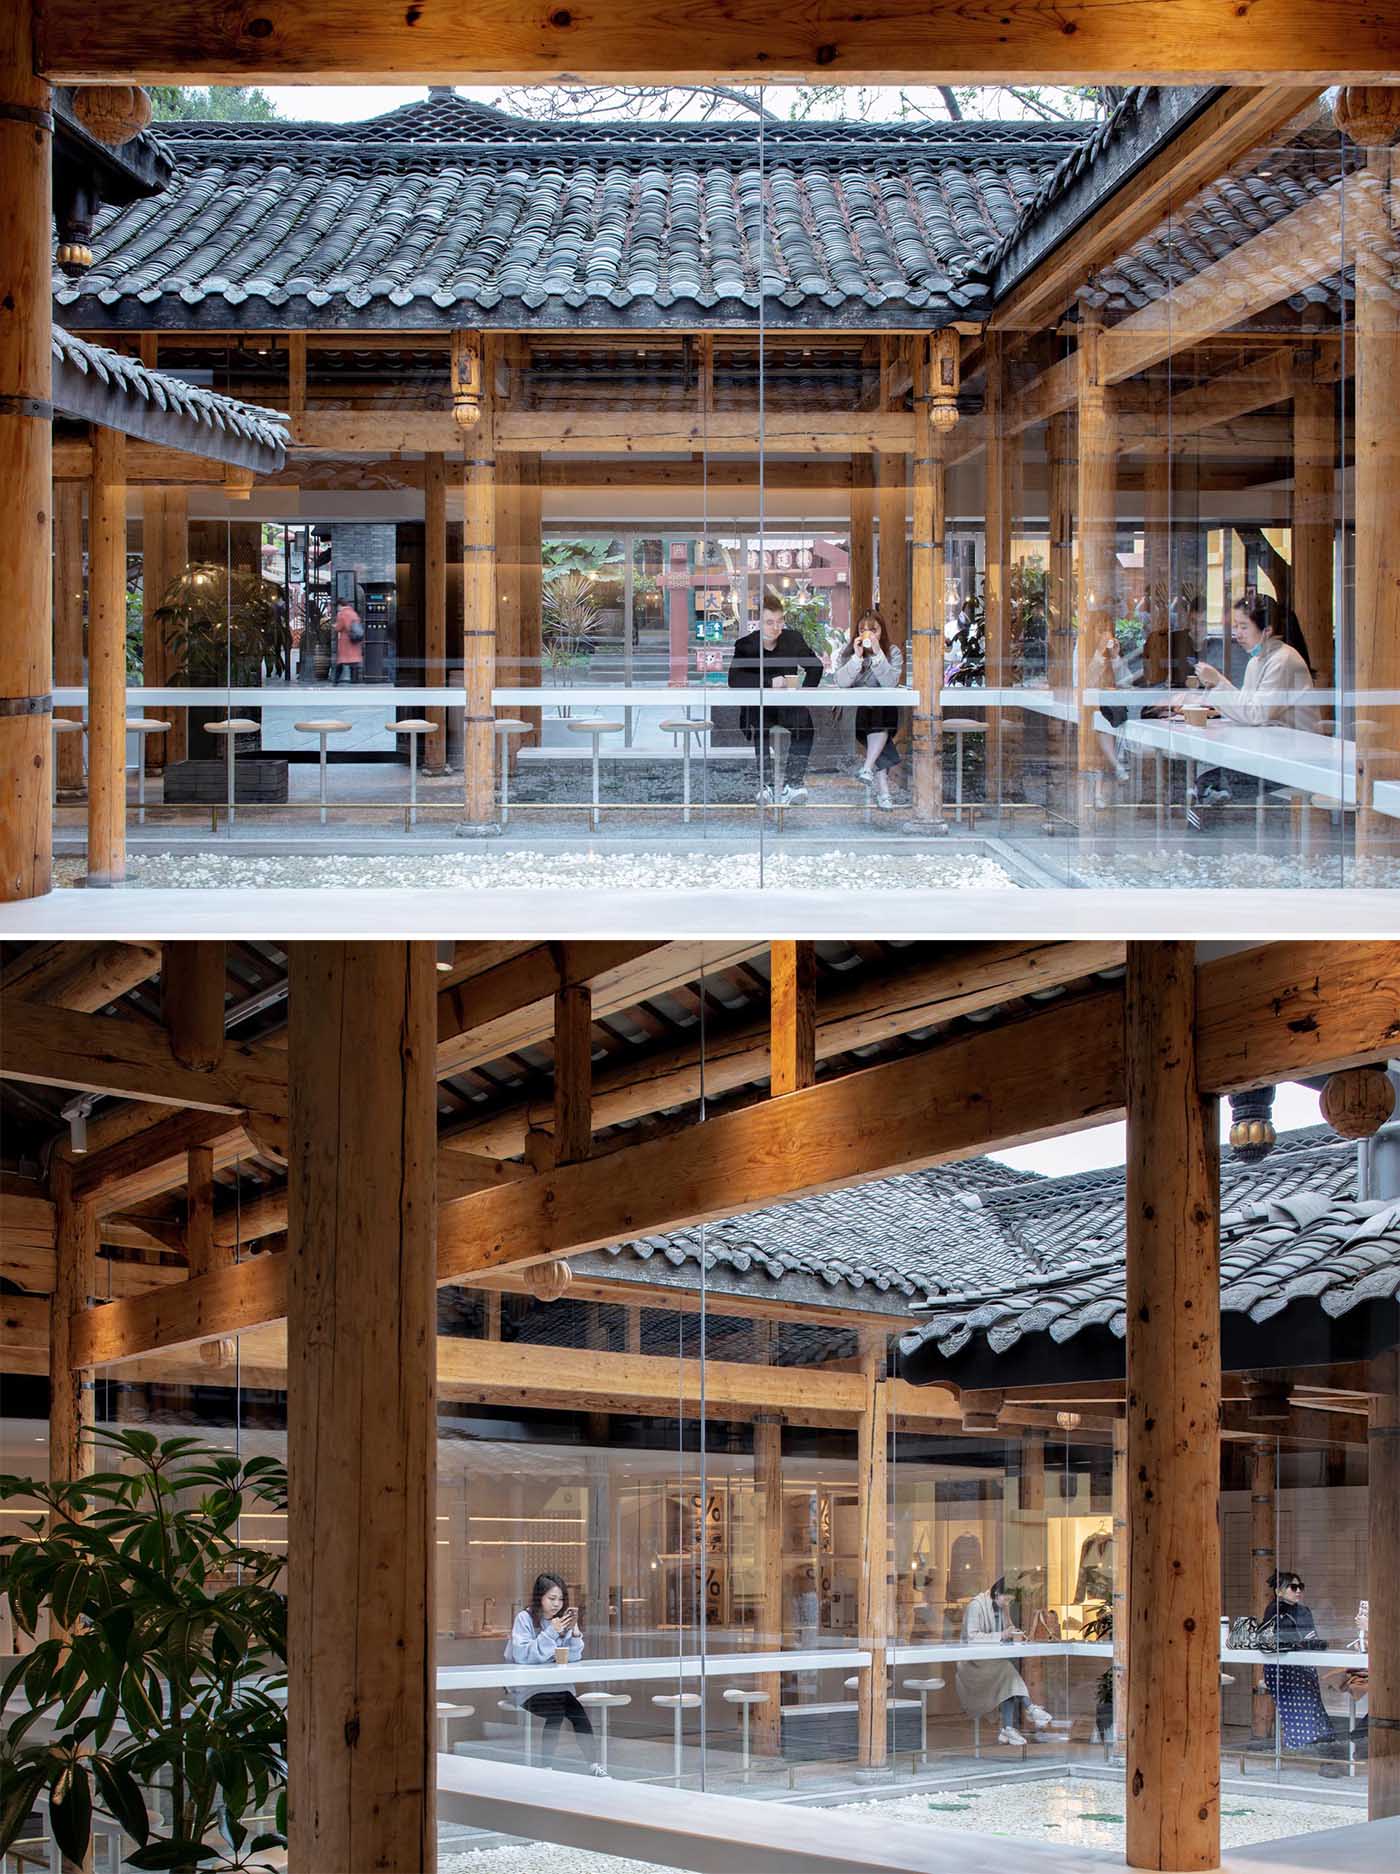 Seating wraps around the glass walls, providing patrons a view of the courtyard.